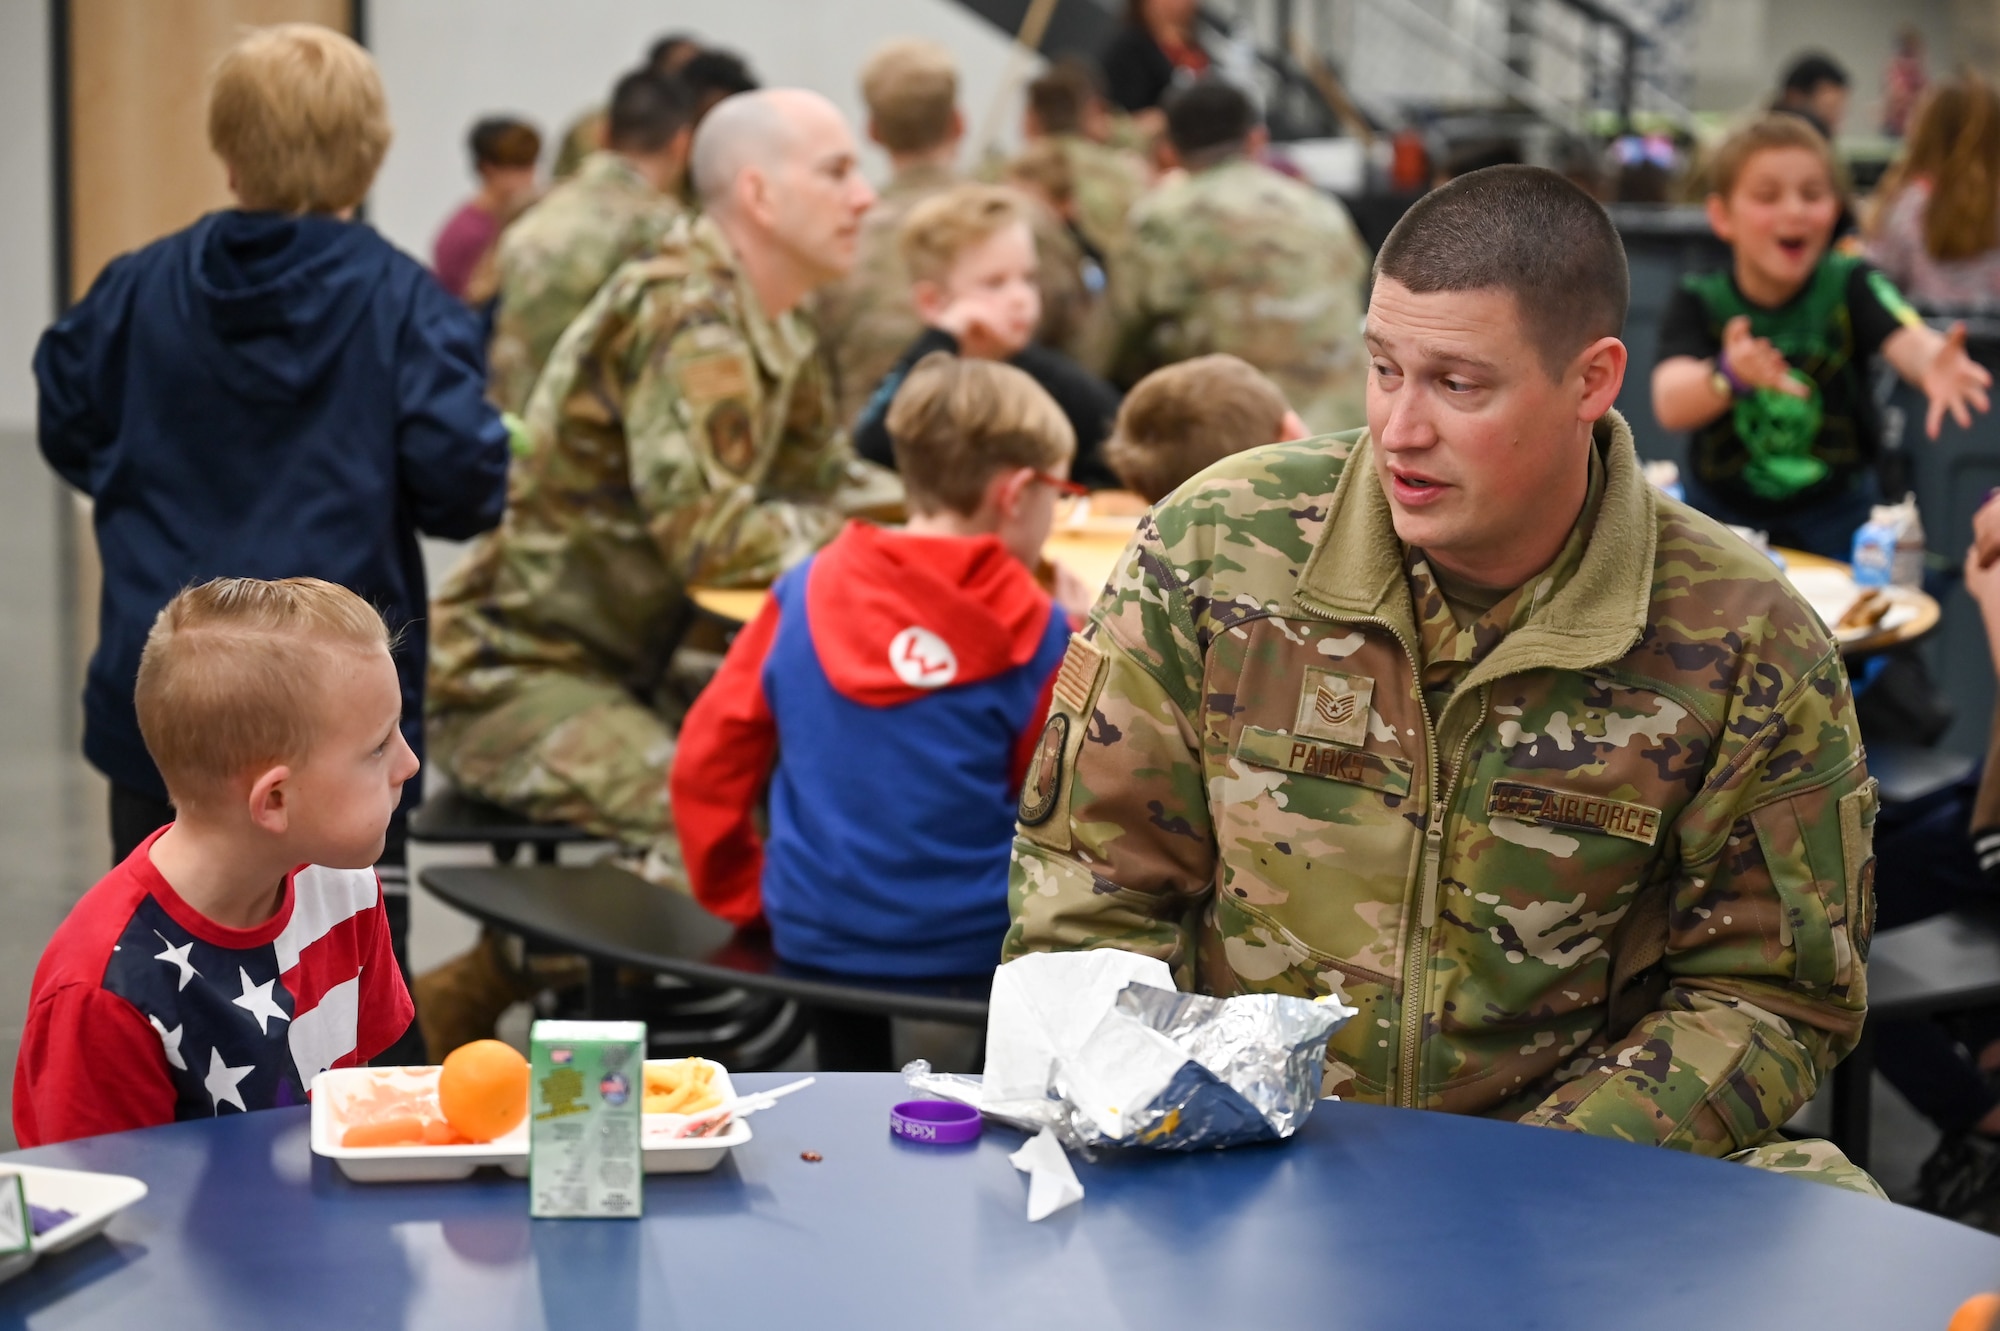 Technical Sgt. Garrett Parks, 75th Force Support Squadron, chats with a South Clearfield Elementary student April 18, 2023, in Clearfield, Utah. The Airmen visited the school to engage with the community during the Month of the Military Child. (U.S. Air Force photo by Cynthia Griggs)